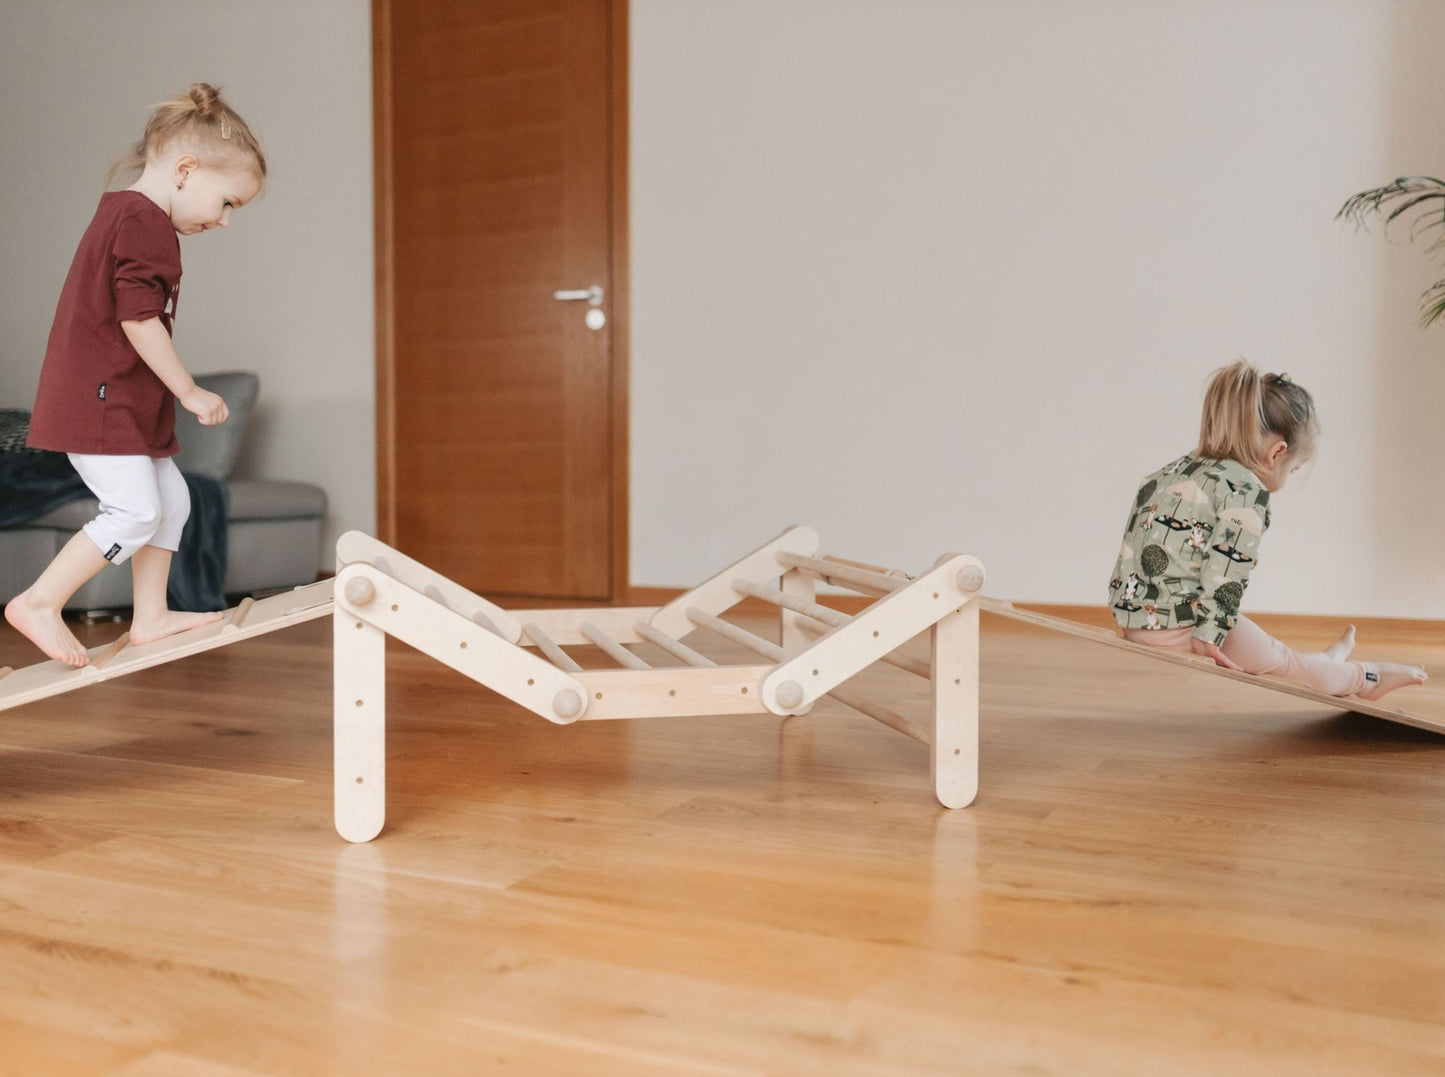 Modifiable Climbing Frame FIPITRI, Inspired by Emmi Pikler